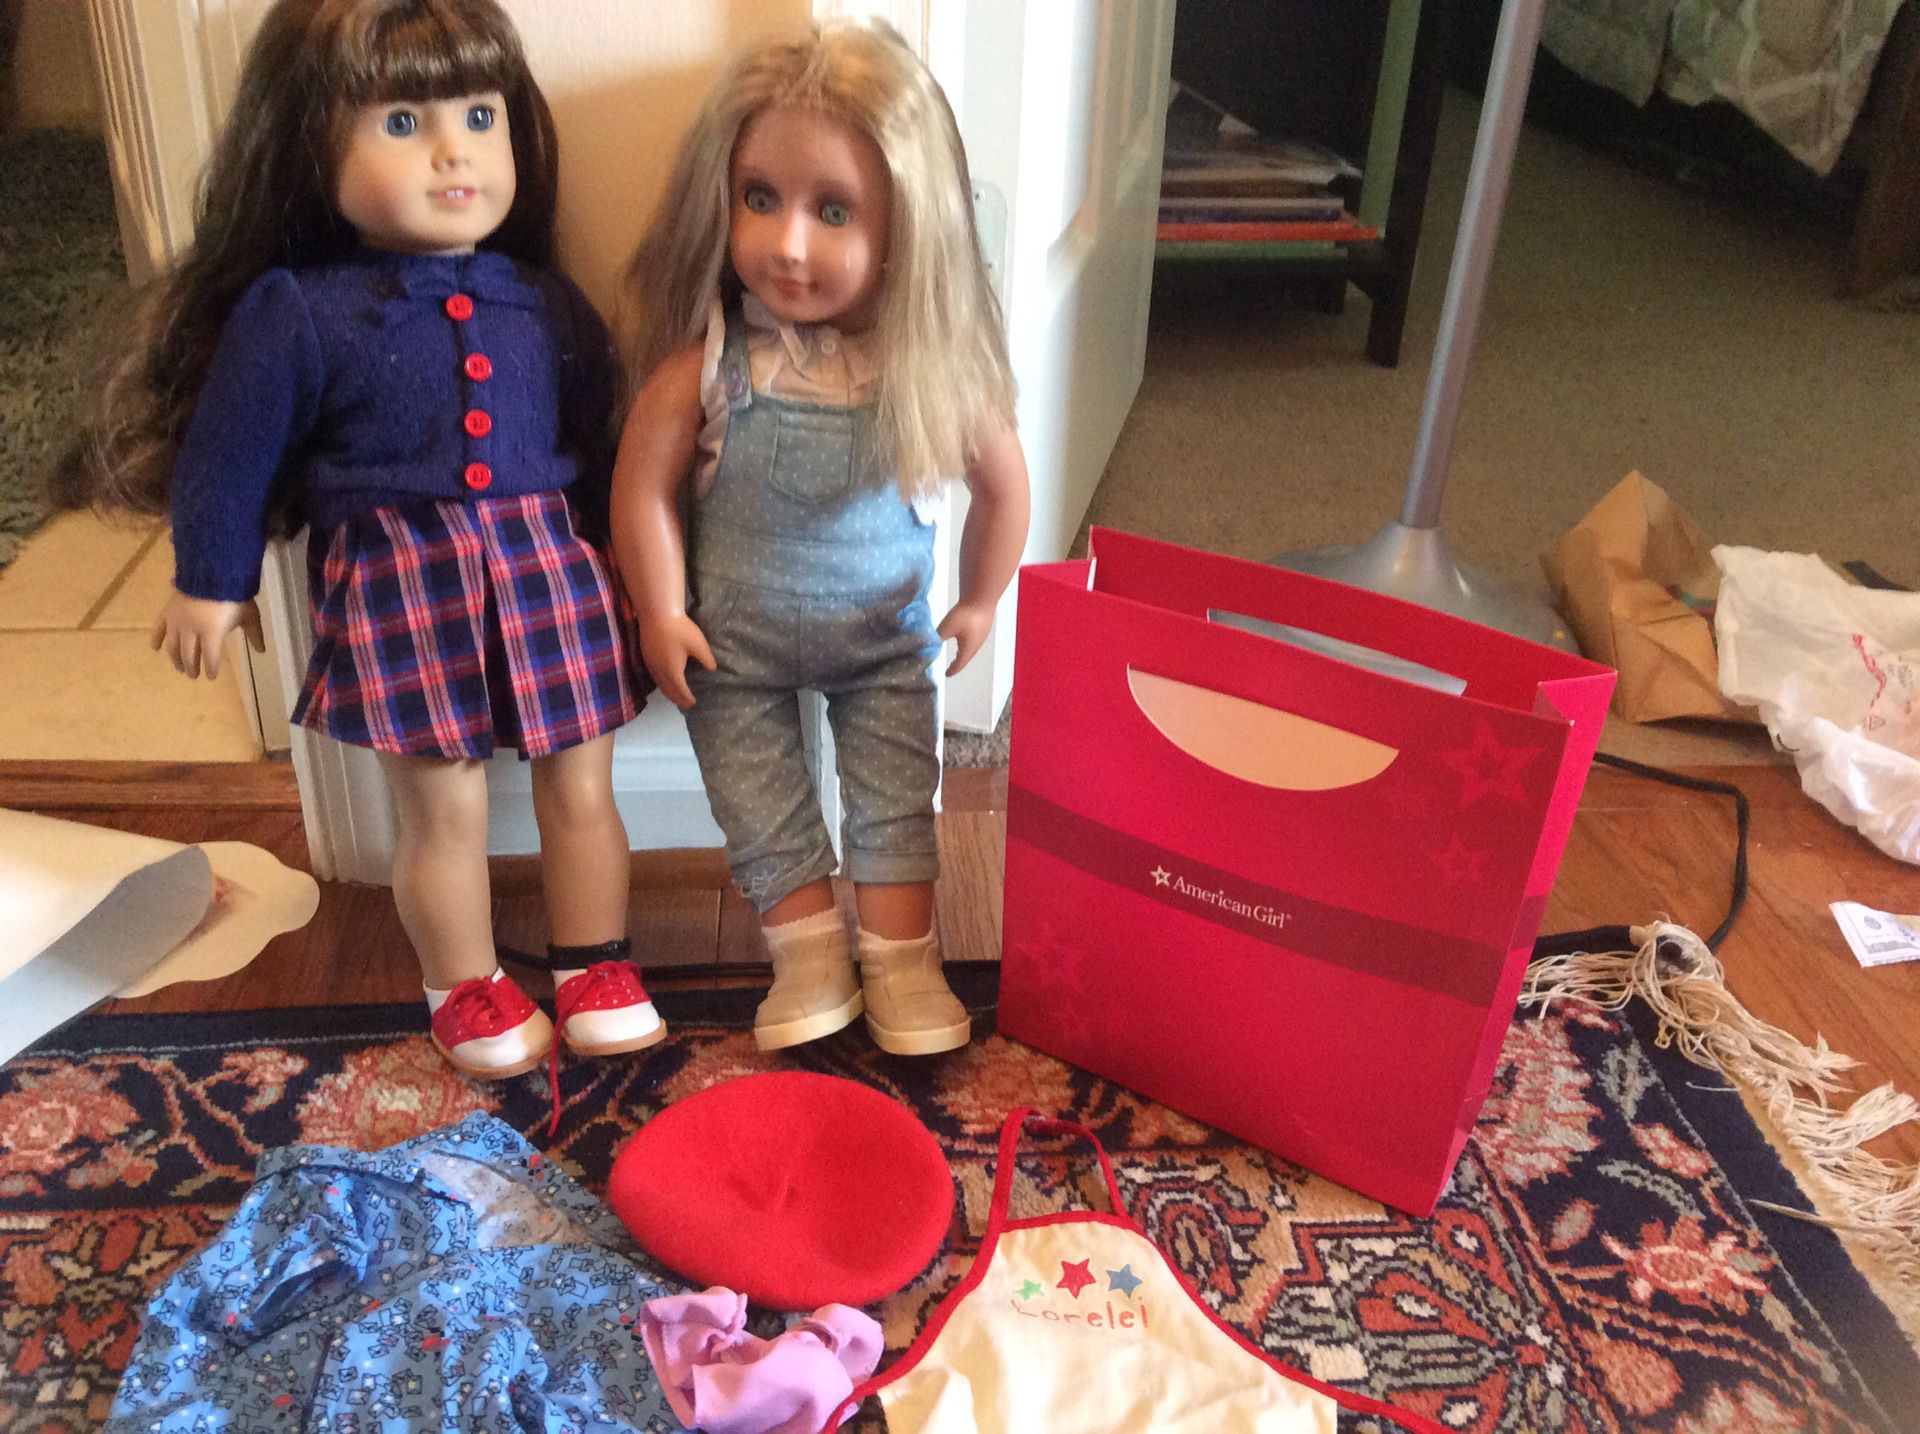 One generation doll and one American girl doll. Some accessories.